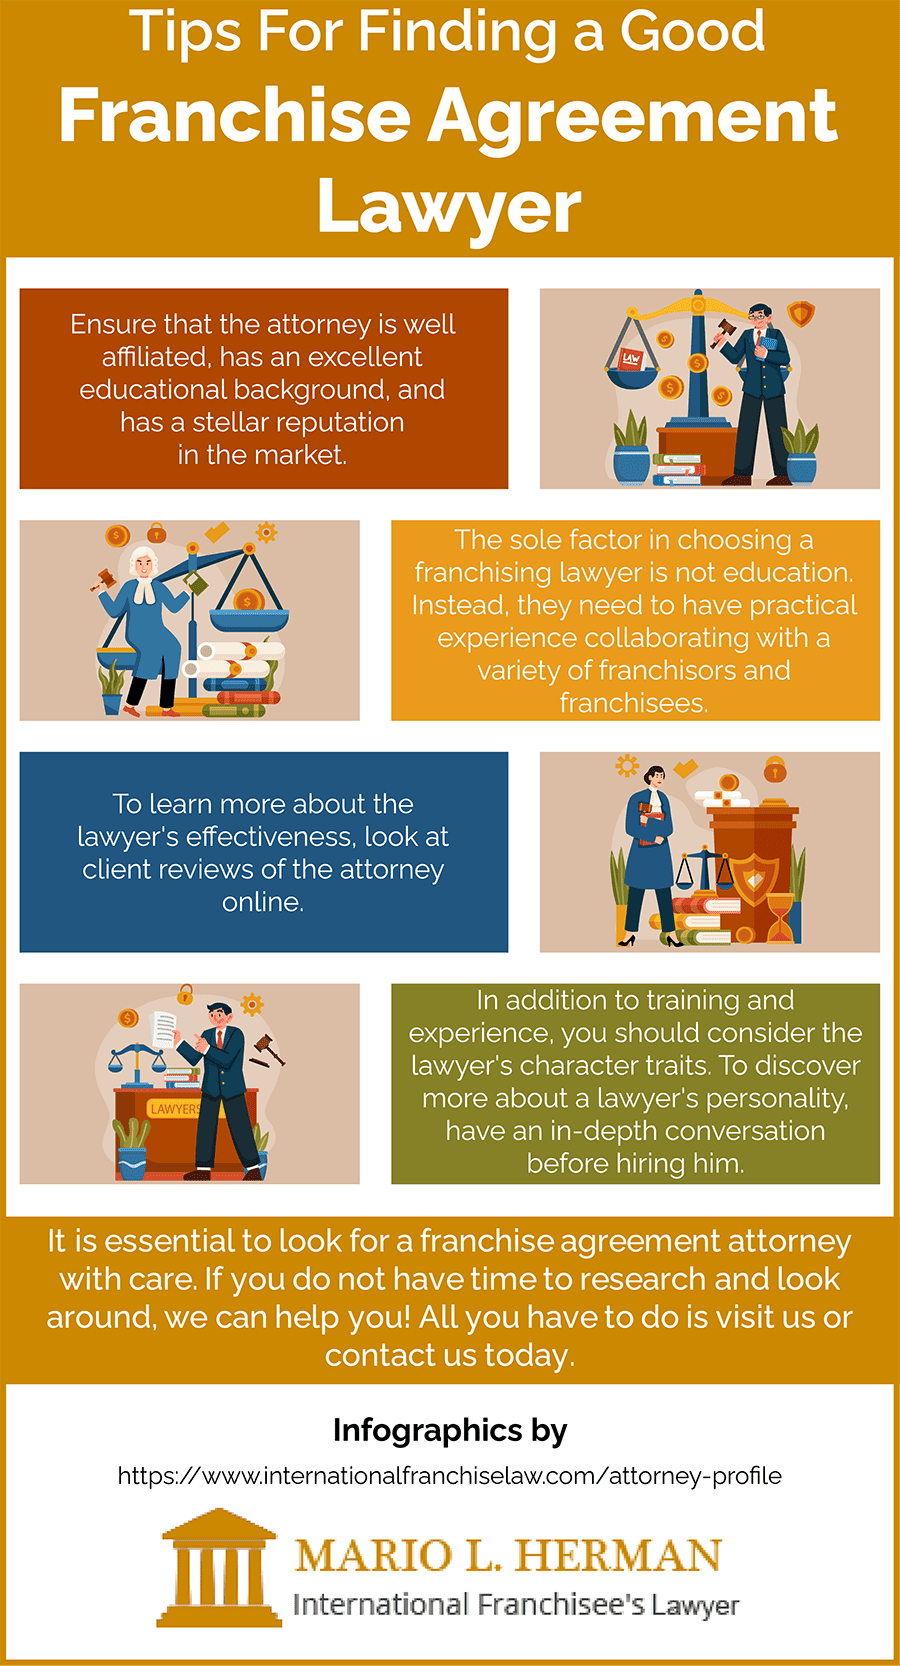 Tips For Finding a Good Franchise Agreement Lawyer